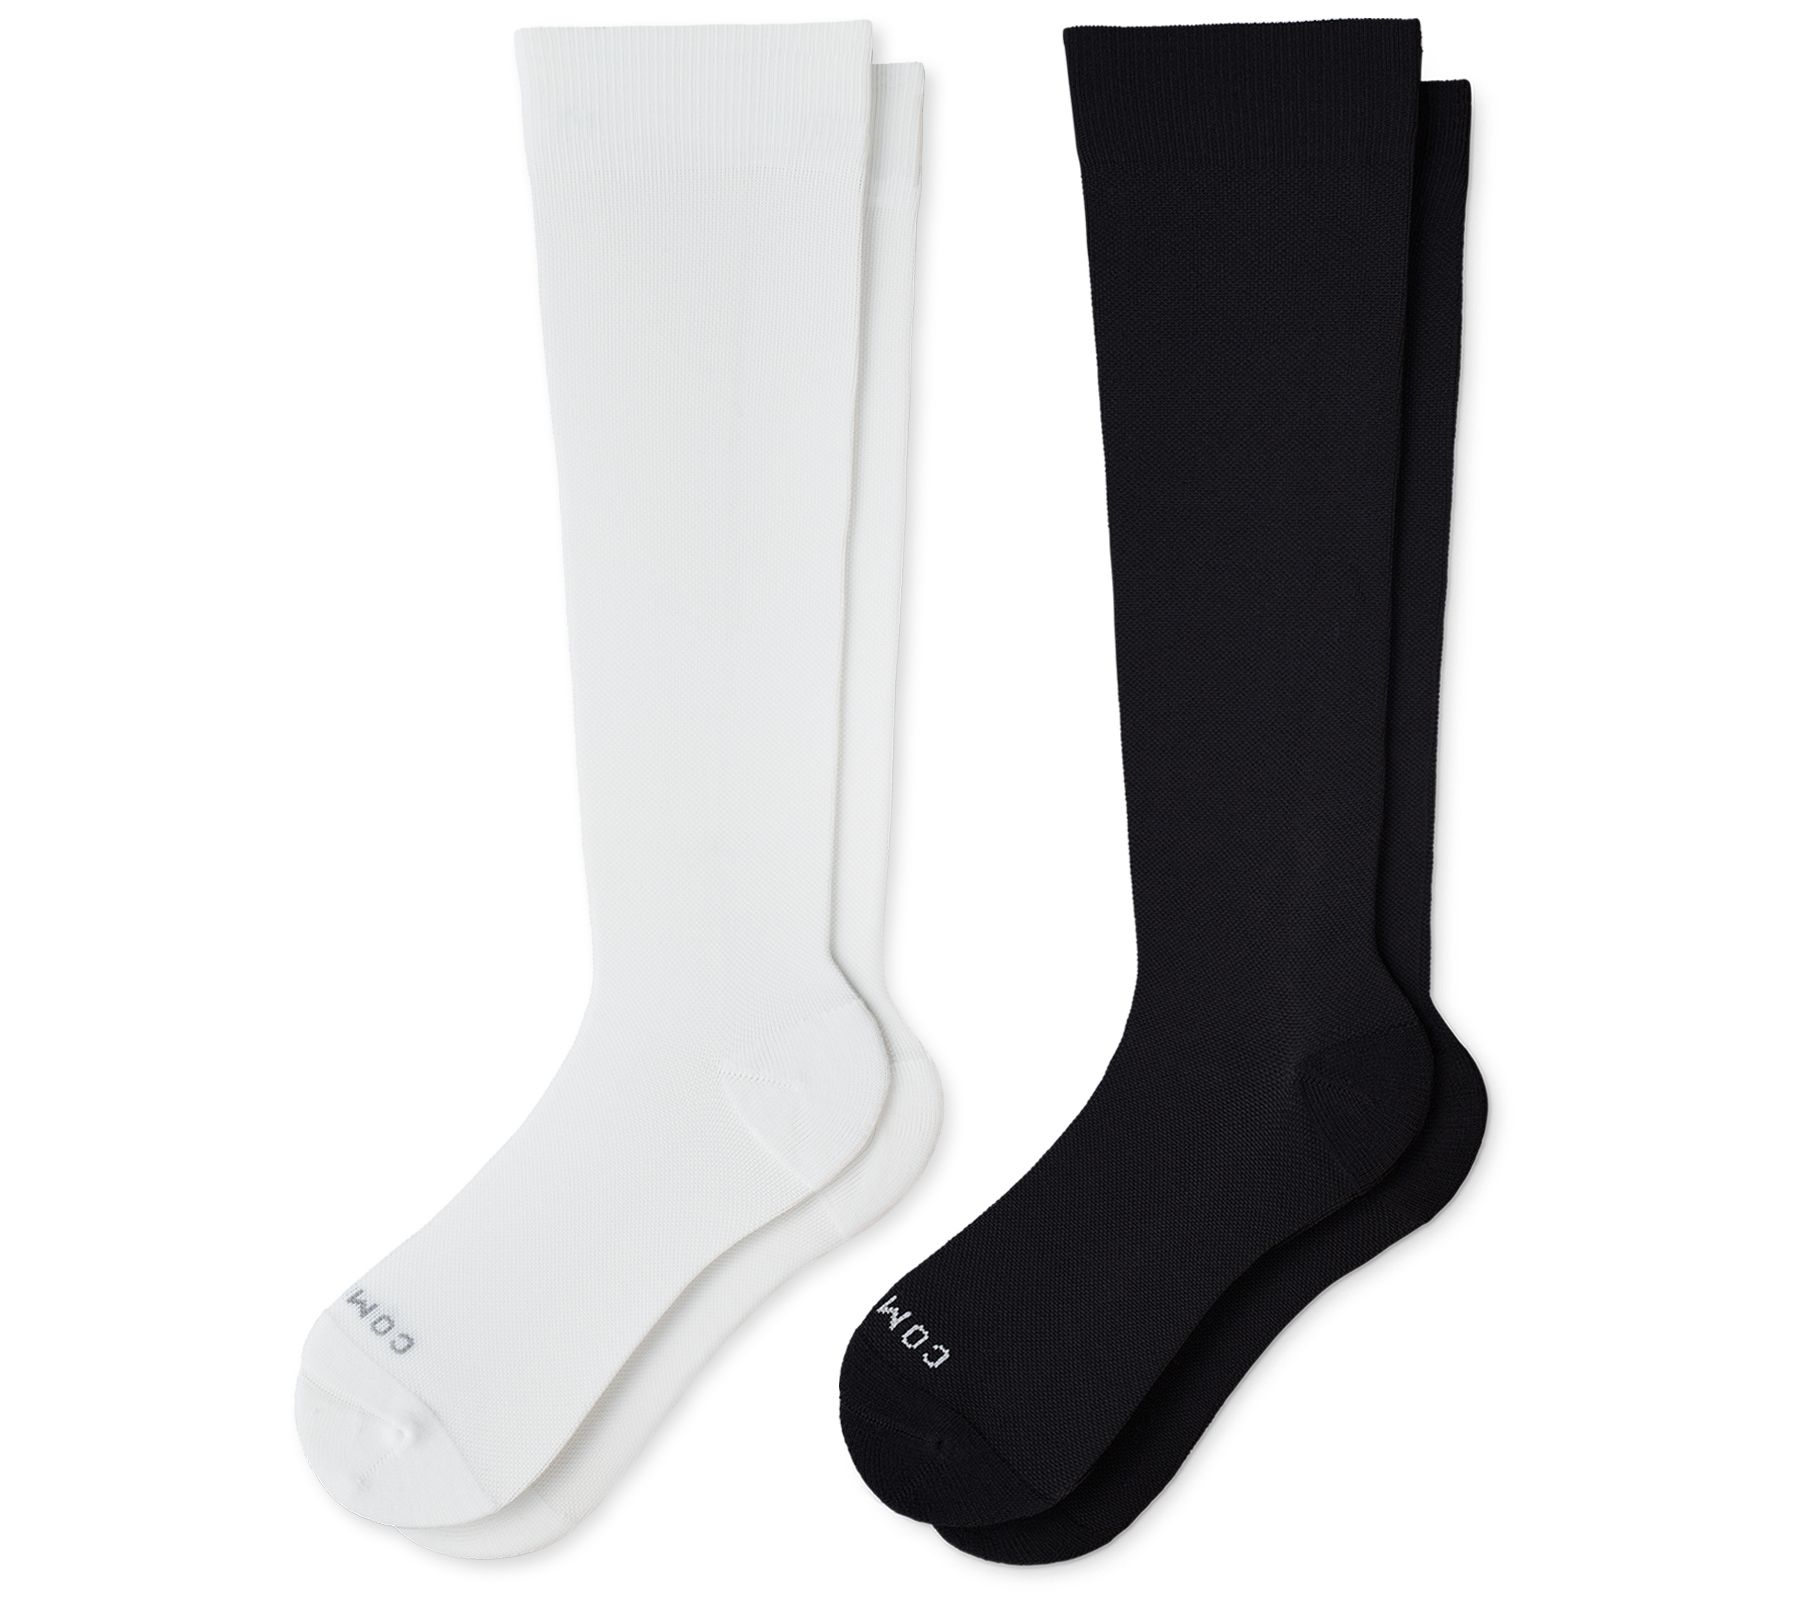 Compression Socks With Knee Protectors Kmart, Calf Support